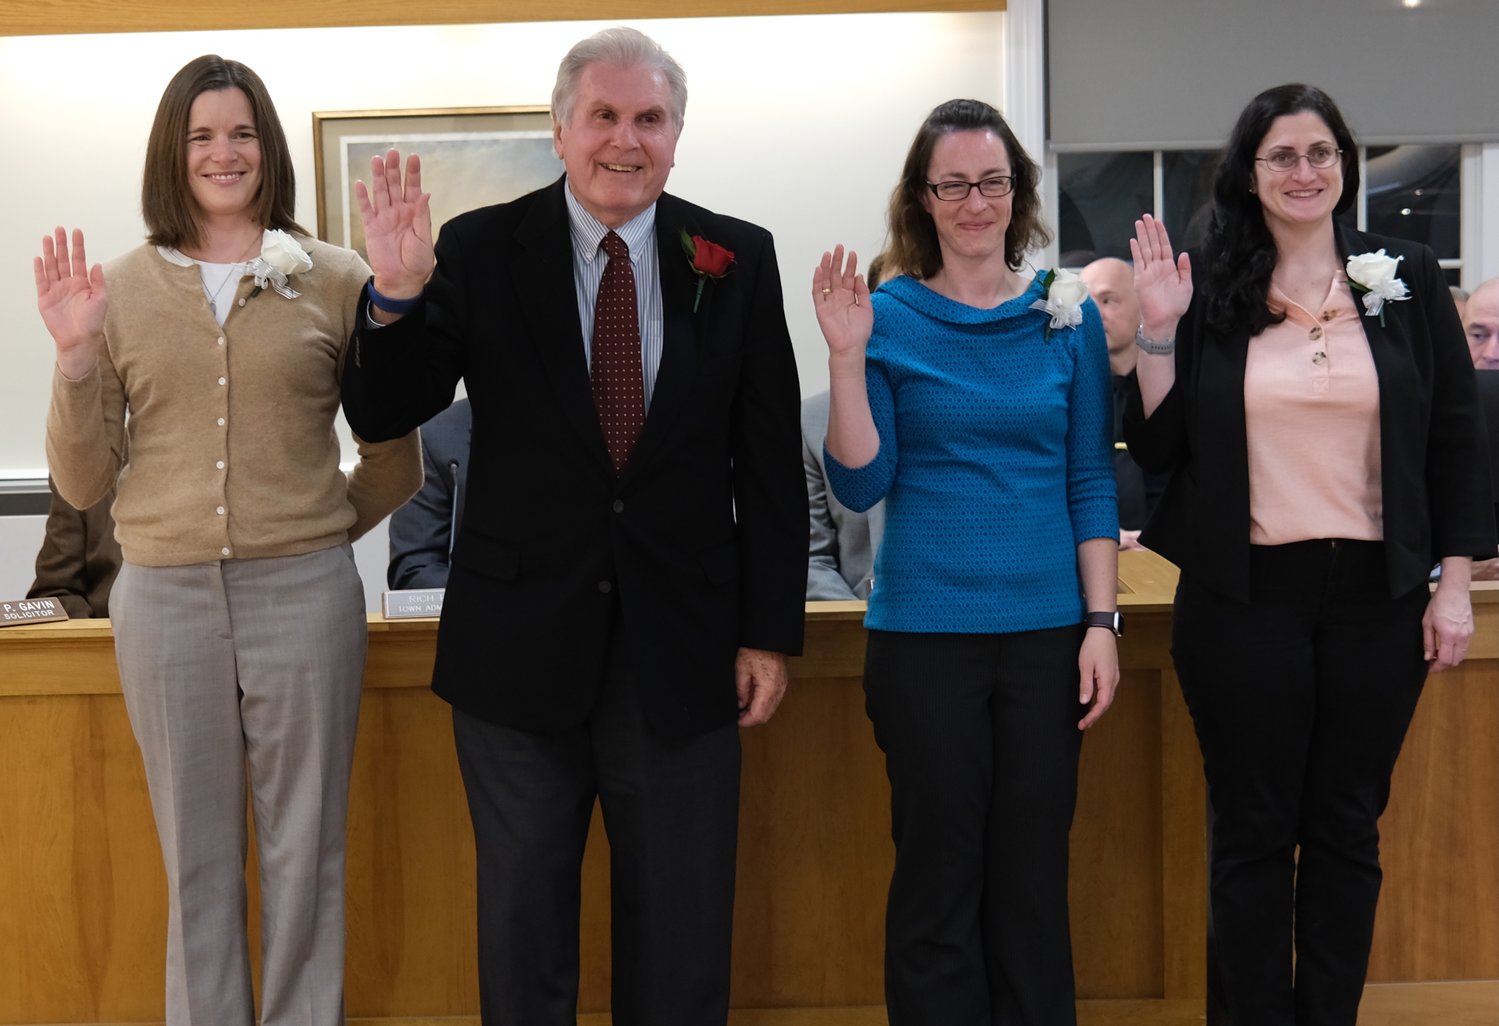 Emily Skeehan, Fred Faerber III, Isabelle Kelly, and Sondra Blank (from left) are sworn in as members of the Portsmouth School Committee by Gov. Daniel McKee during a ceremony at Town Hall Monday night.